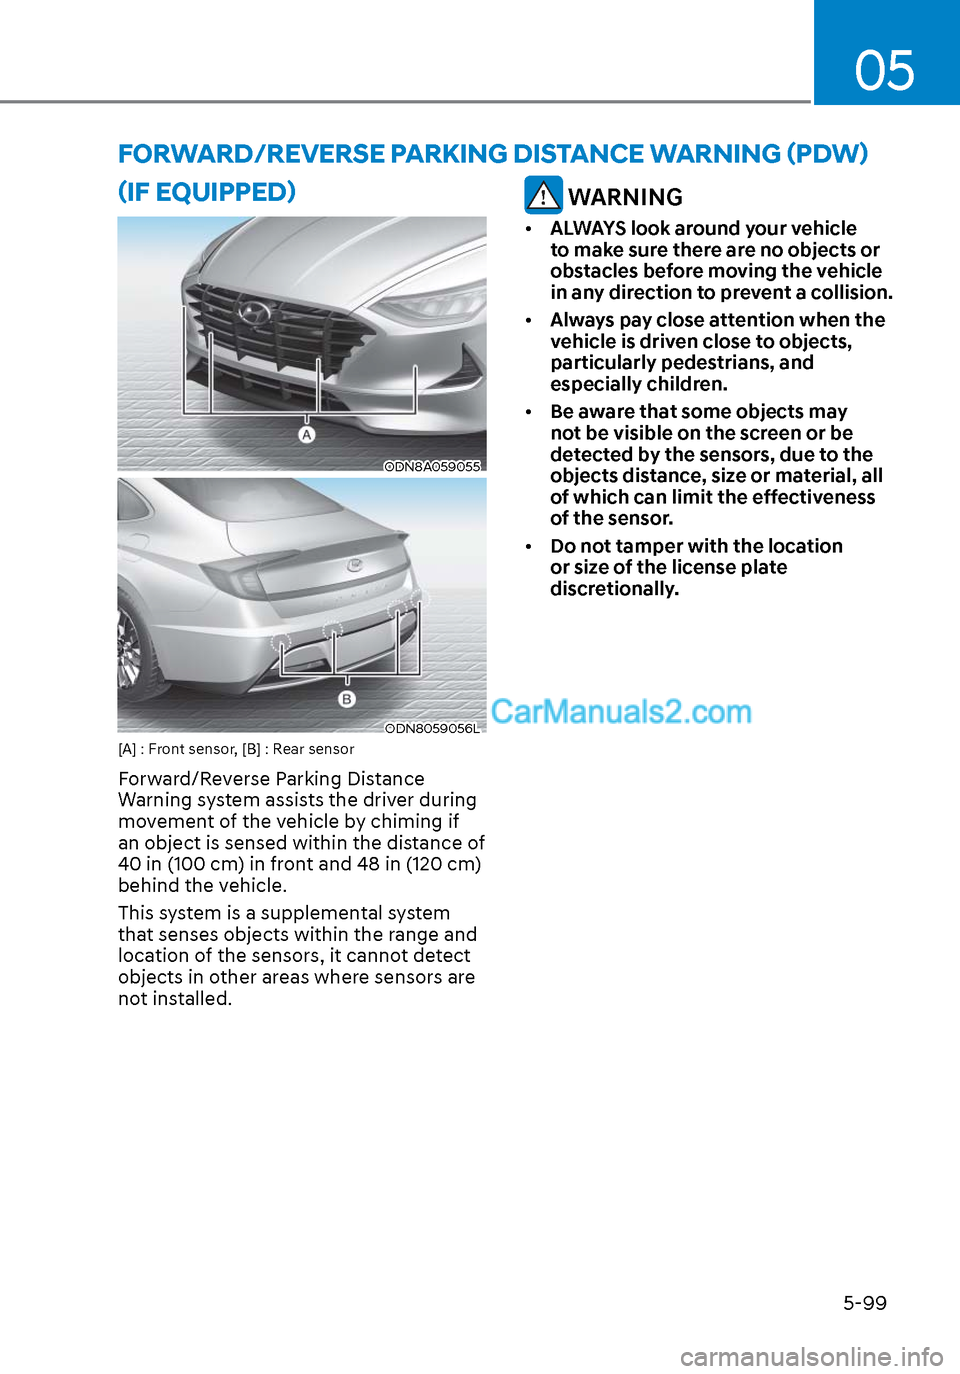 Hyundai Sonata 2020  Owners Manual 05
5-99
 FORWARD/REVERSE PARKING DISTANCE WARNING (PDW) 
(IF EQUIPPED)
ODN8A059055ODN8A059055
ODN8059056LODN8059056L[A] : Front sensor, [B] : Rear sensor
Forward/Reverse Parking Distance 
Warning syst